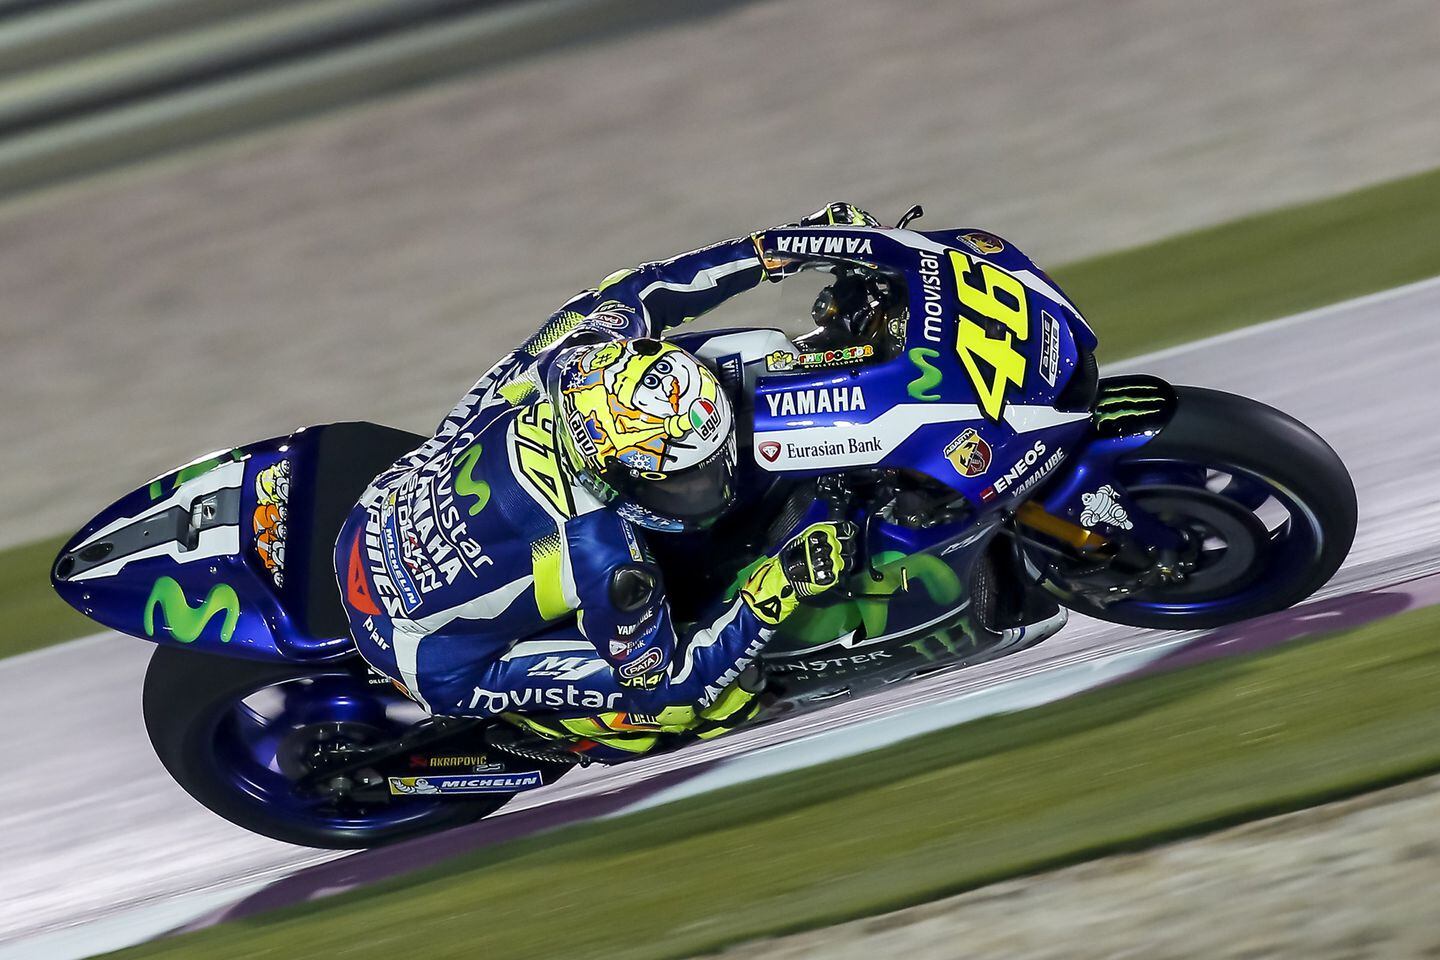 2016 MotoGP Preview | Cycle World